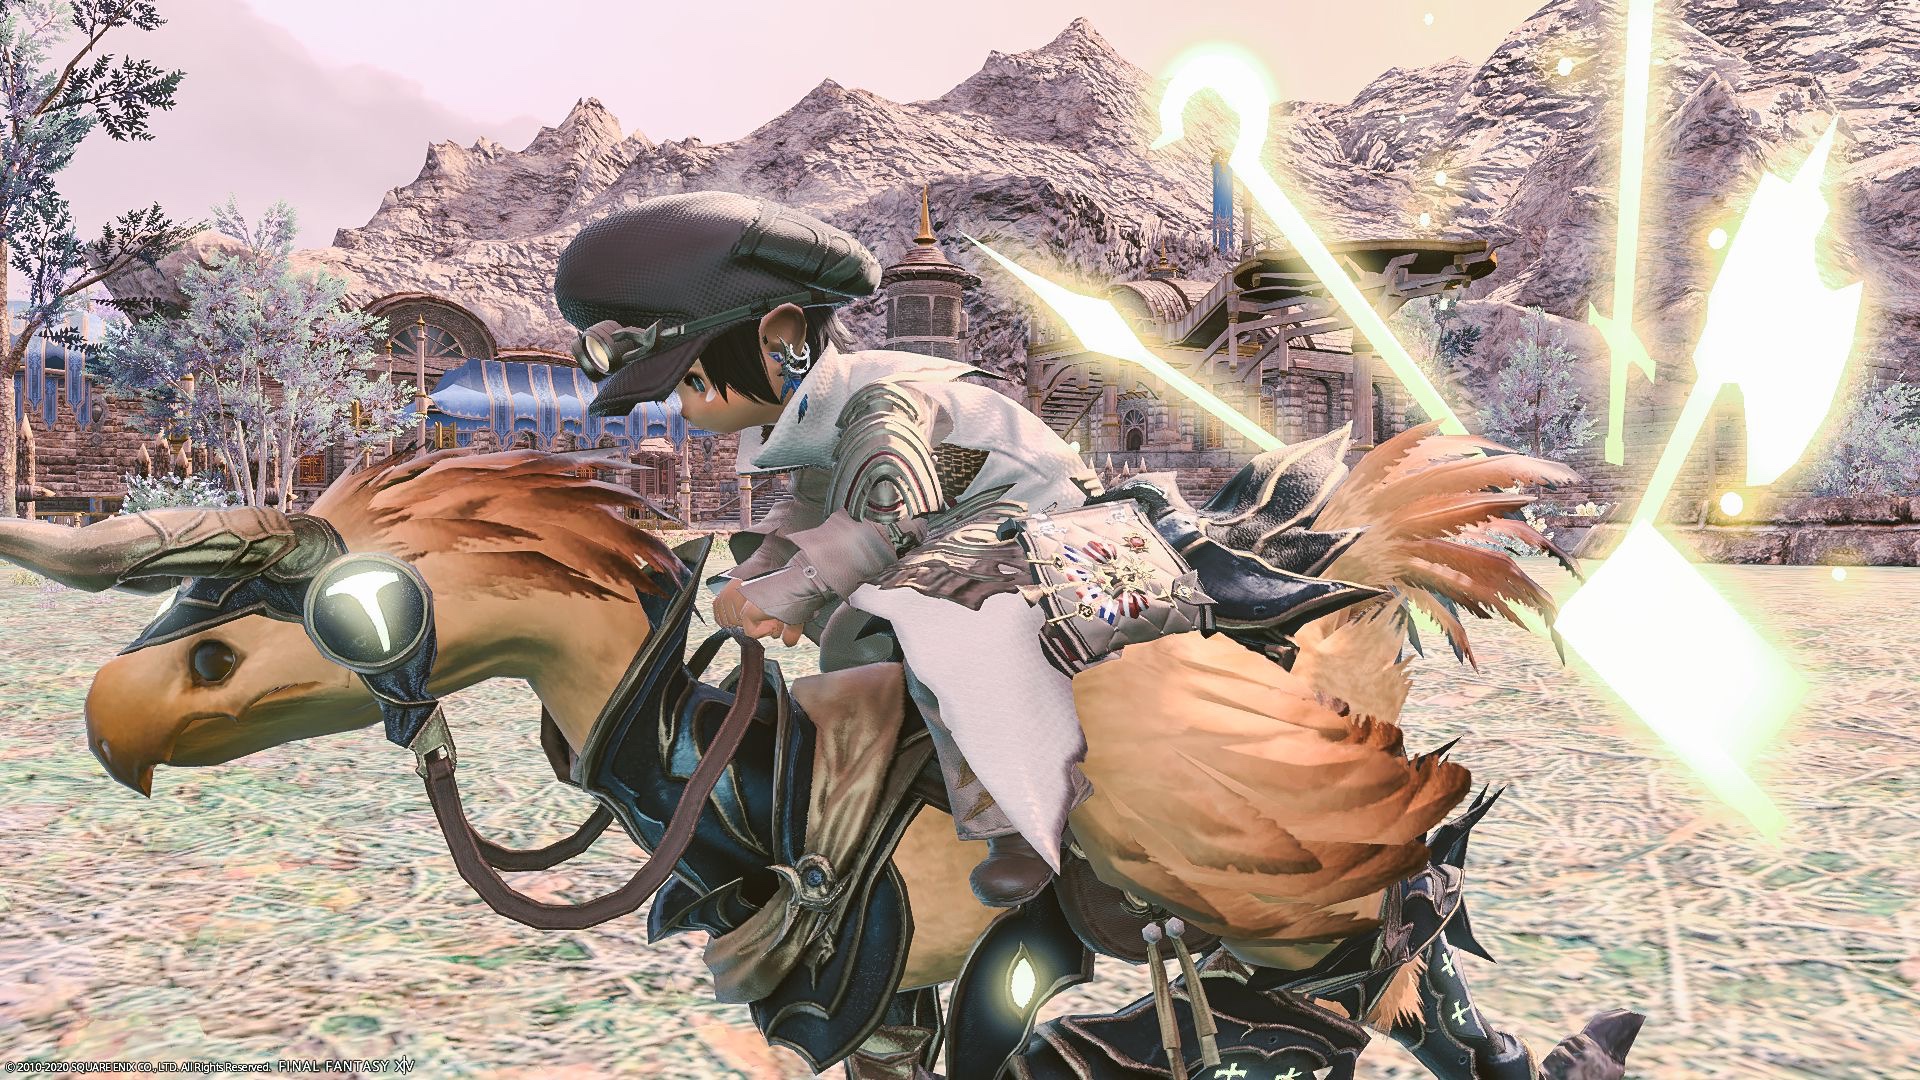 Warrior Of Light Extreme Chocobo Armor With Glowing Weapons True Barding Of Light Ff14ブログ Norirow Note エオルゼア戦記